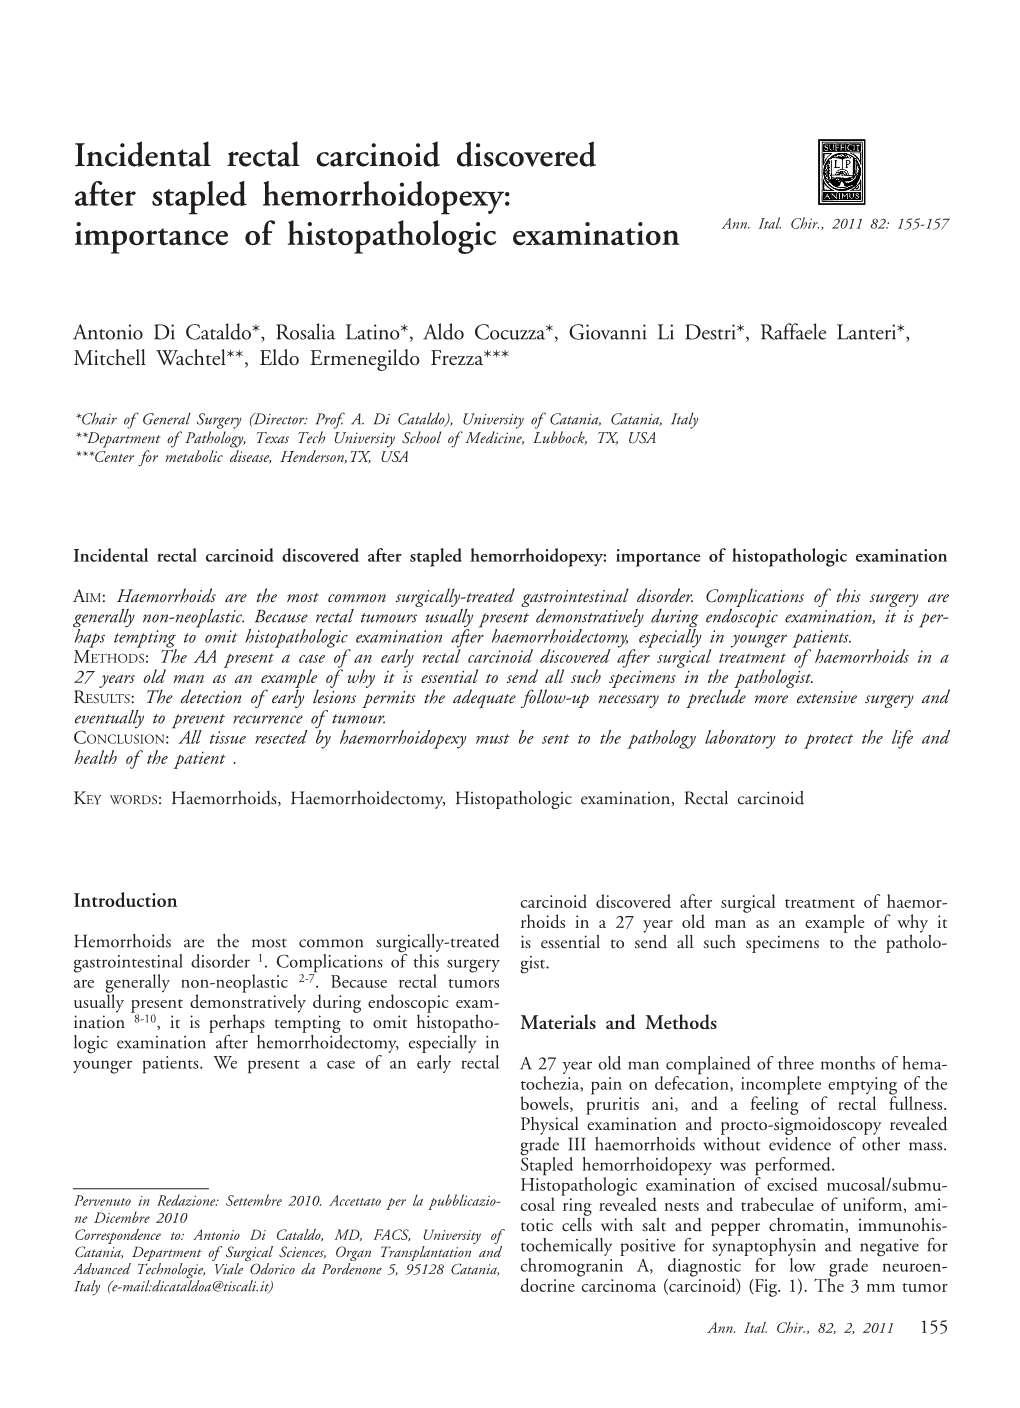 Incidental Rectal Carcinoid Discovered After Stapled Hemorrhoidopexy: Importance of Histopathologic Examination Ann